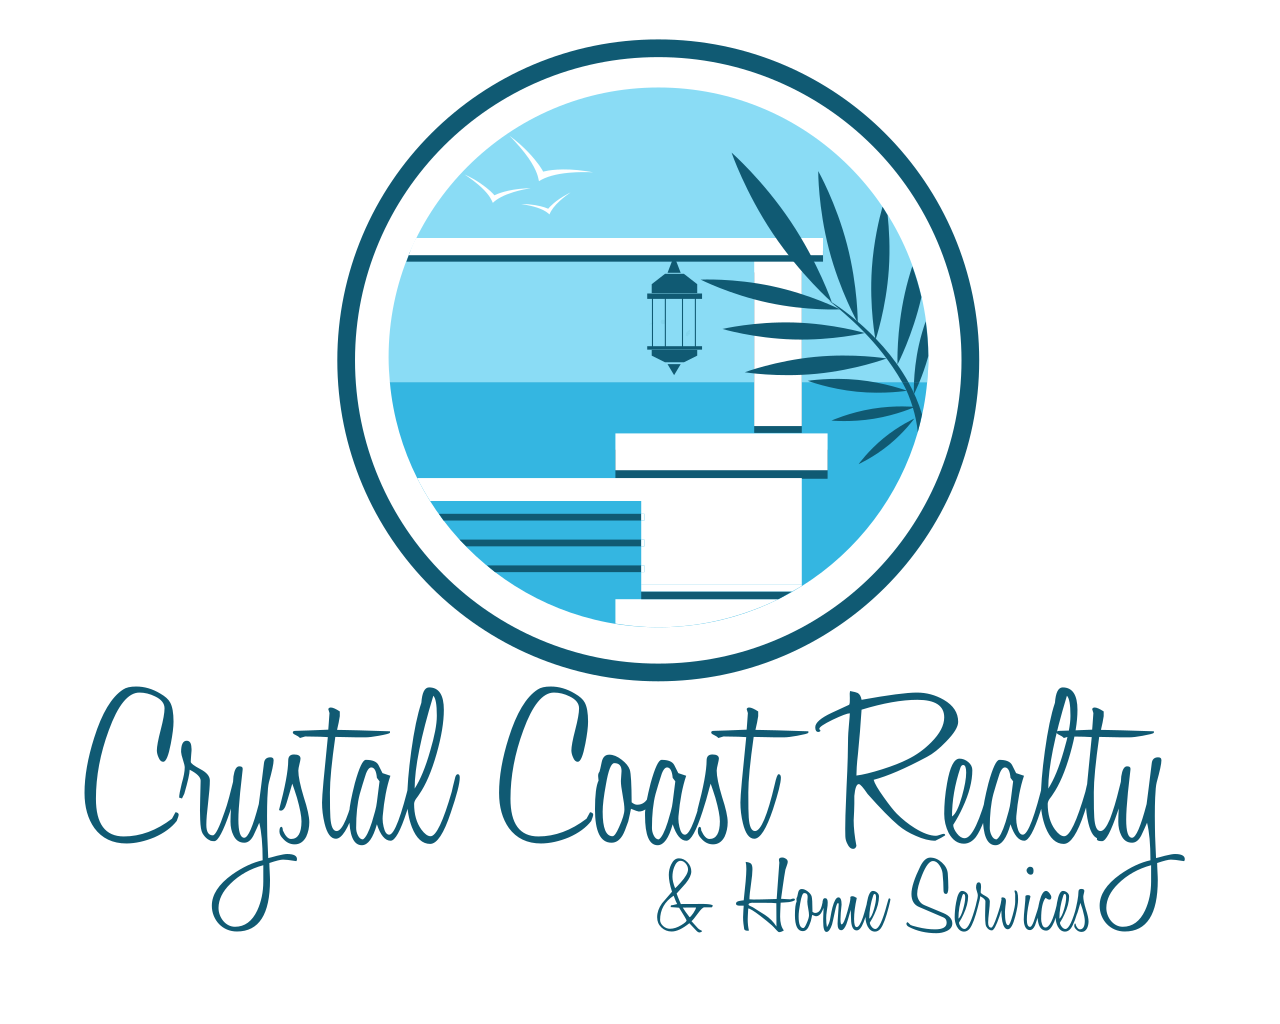 Crystal Coast Realty & Home Services